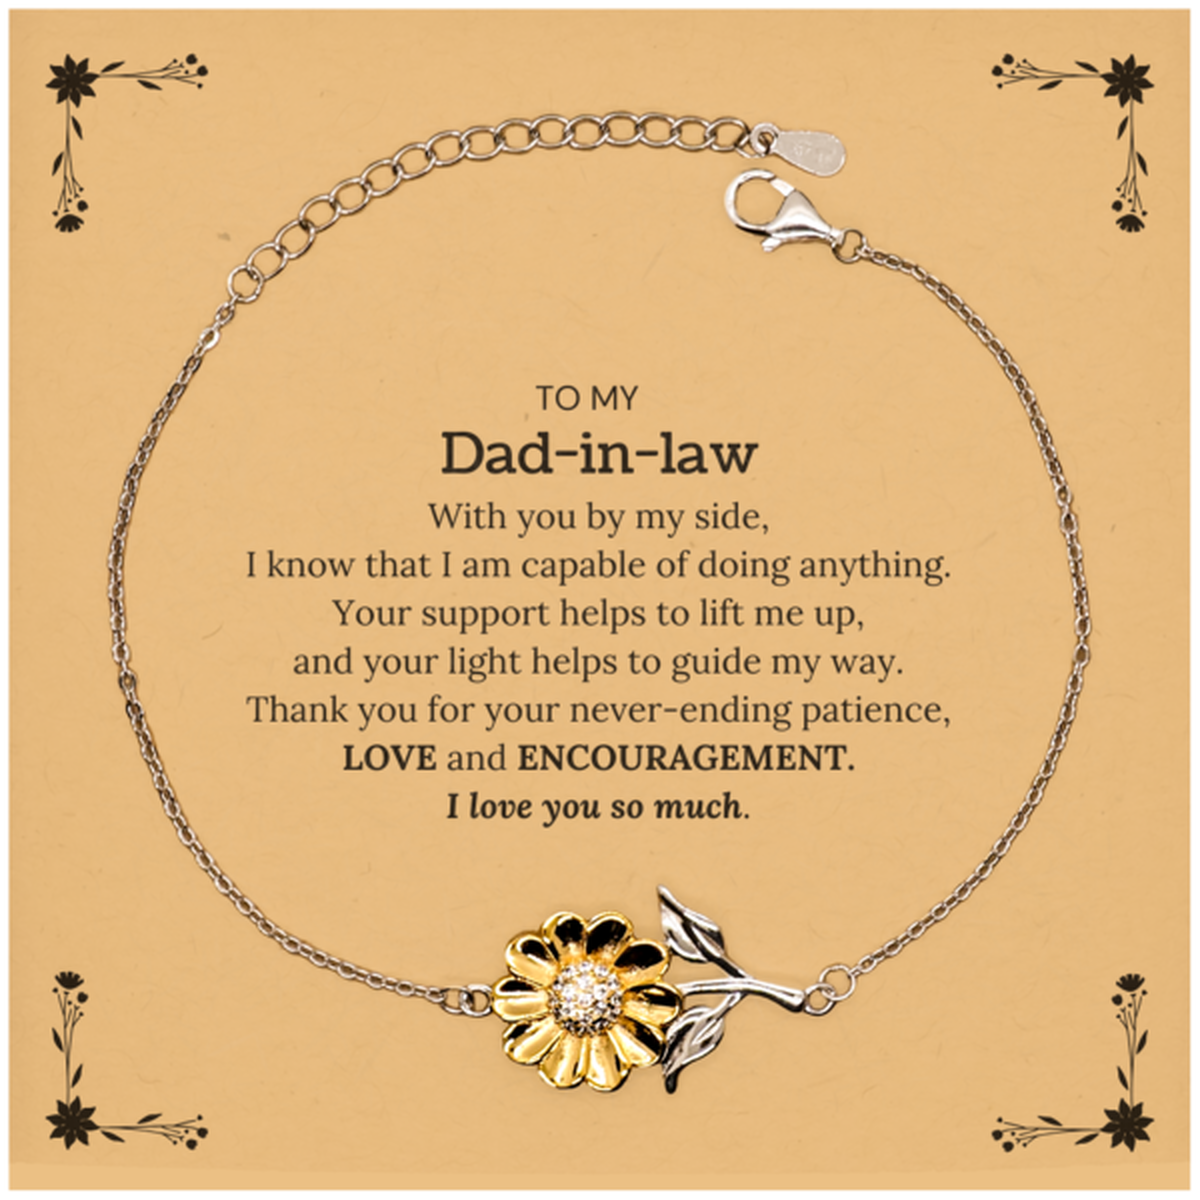 Appreciation Dad-in-law Sunflower Bracelet Gifts, To My Dad-in-law Birthday Christmas Wedding Keepsake Gifts for Dad-in-law With you by my side, I know that I am capable of doing anything. I love you so much